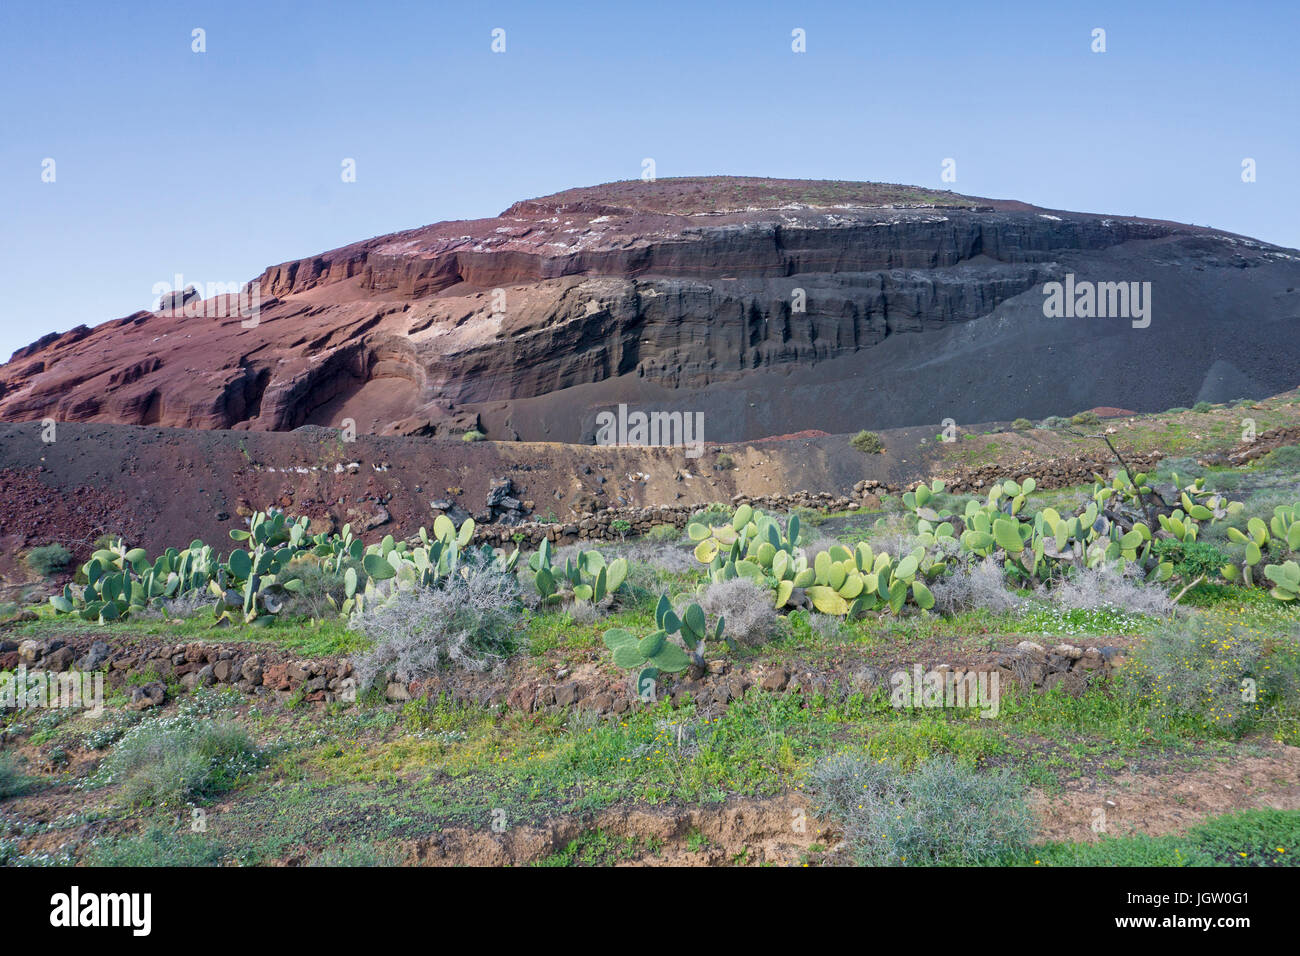 Cactus field in front of a stone pit, Femes, Lanzarote island, Canary islands, Spain, Europe Stock Photo